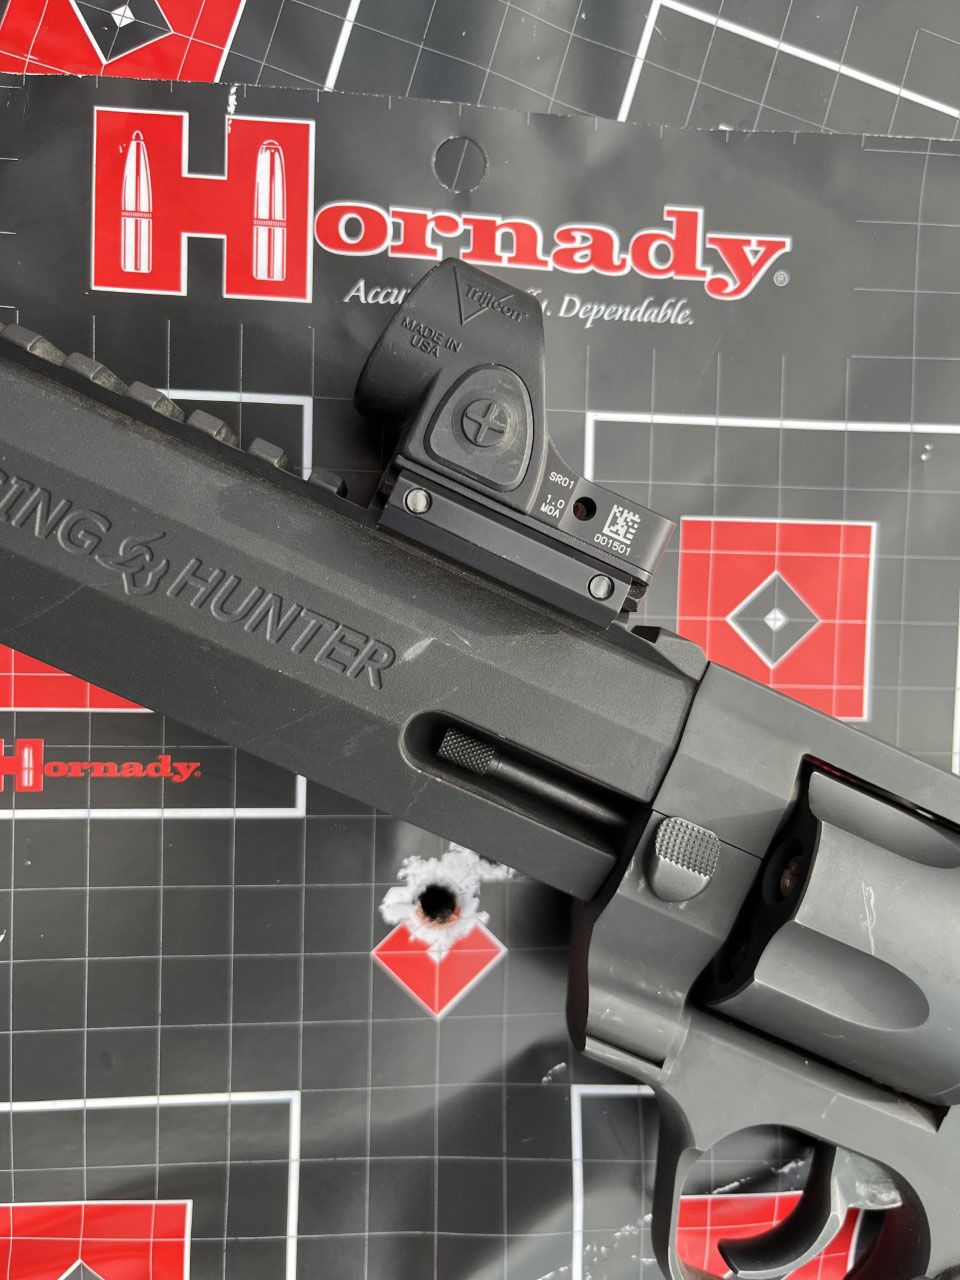 After numerous rounds Larry put his Raging Hunter .454 Casull topped with Trijicon's SRO red dot sight and shooting Hornady 240-grain XTP MAG ammo..when he returned he fired one shot at 100 yards to be sure it was still sighted in...it was!